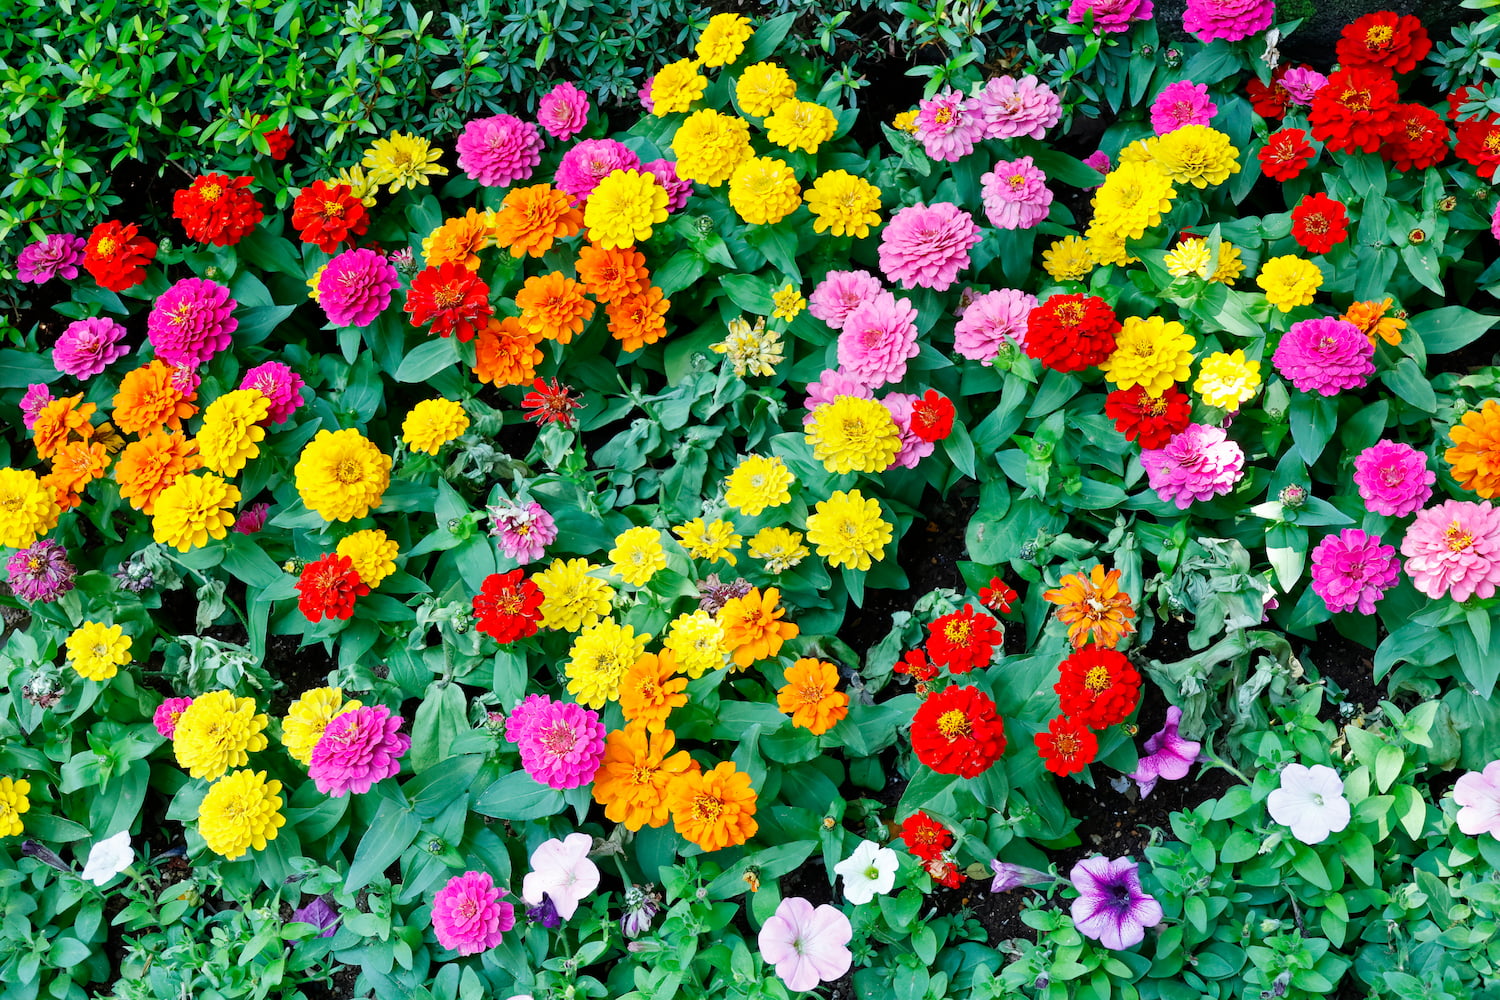 A vibrant array of zinnias and petunias, like a garden of cheerful dialogue among mothers and women everywhere (Tokyo, May 2023)